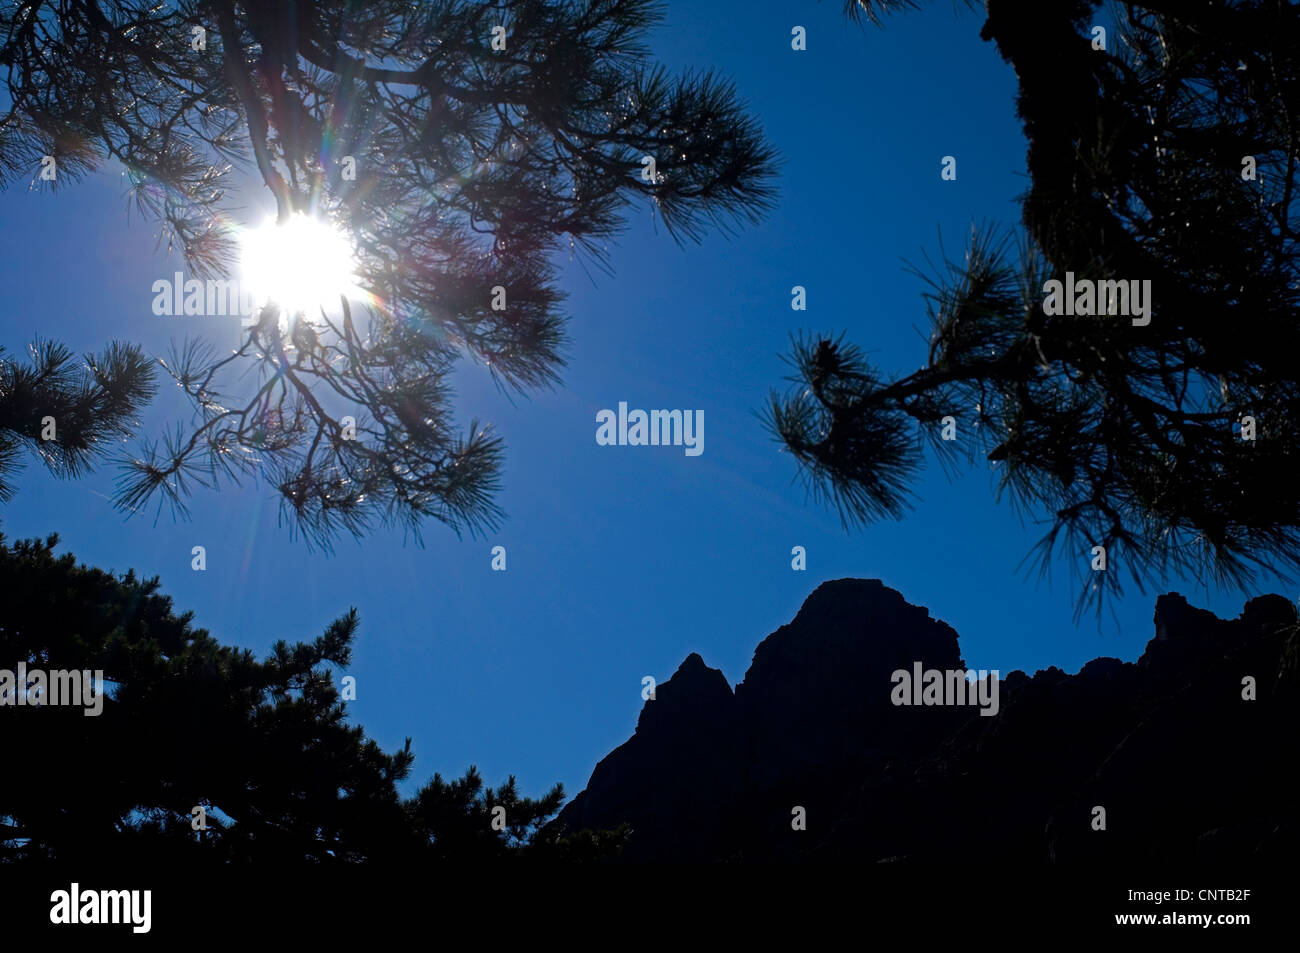 silhouettes of pine branches in front of the mountain tops of the Bavella Massif in backlight, France, Corsica, Corse-du-Sud Stock Photo